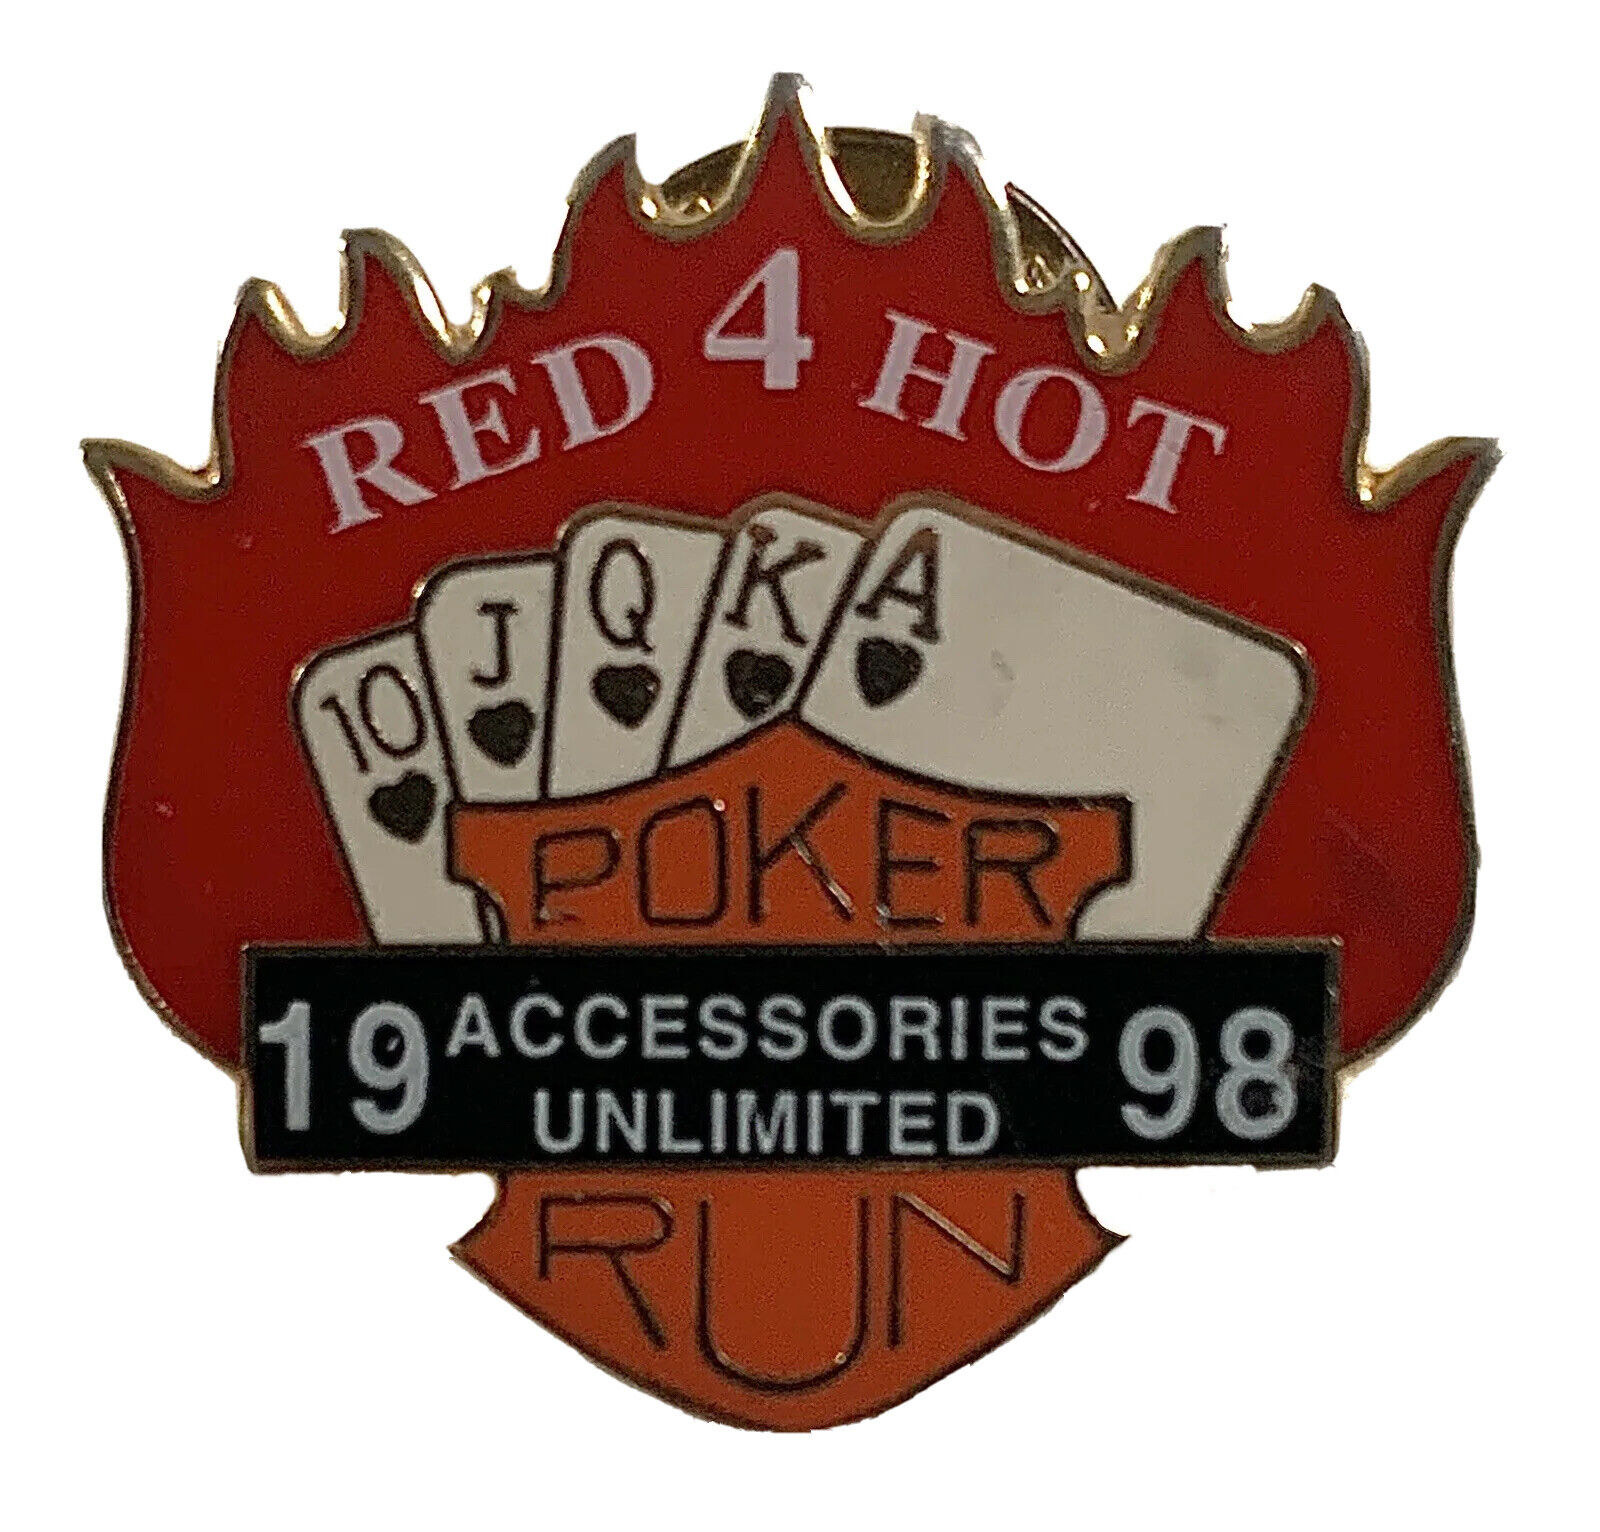 Vintage 1998 Red Hot 4 Poker Run Motorcycle Club Accessories Unlimited Pin Vegas